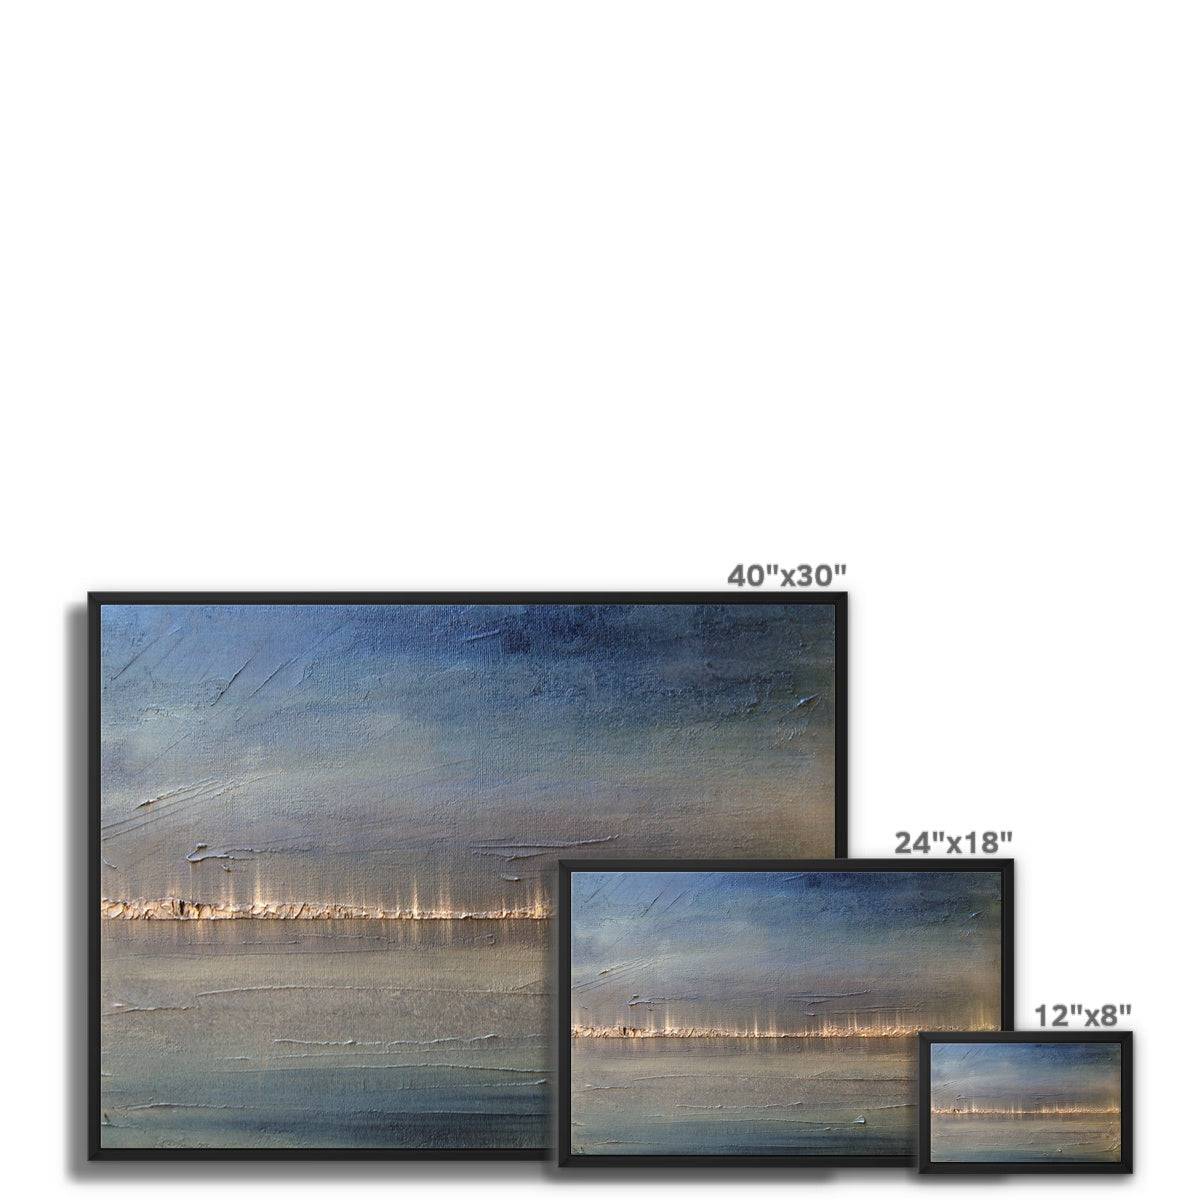 Distant Lights Lake Ontario Painting | Framed Canvas From Scotland-Floating Framed Canvas Prints-World Art Gallery-Paintings, Prints, Homeware, Art Gifts From Scotland By Scottish Artist Kevin Hunter